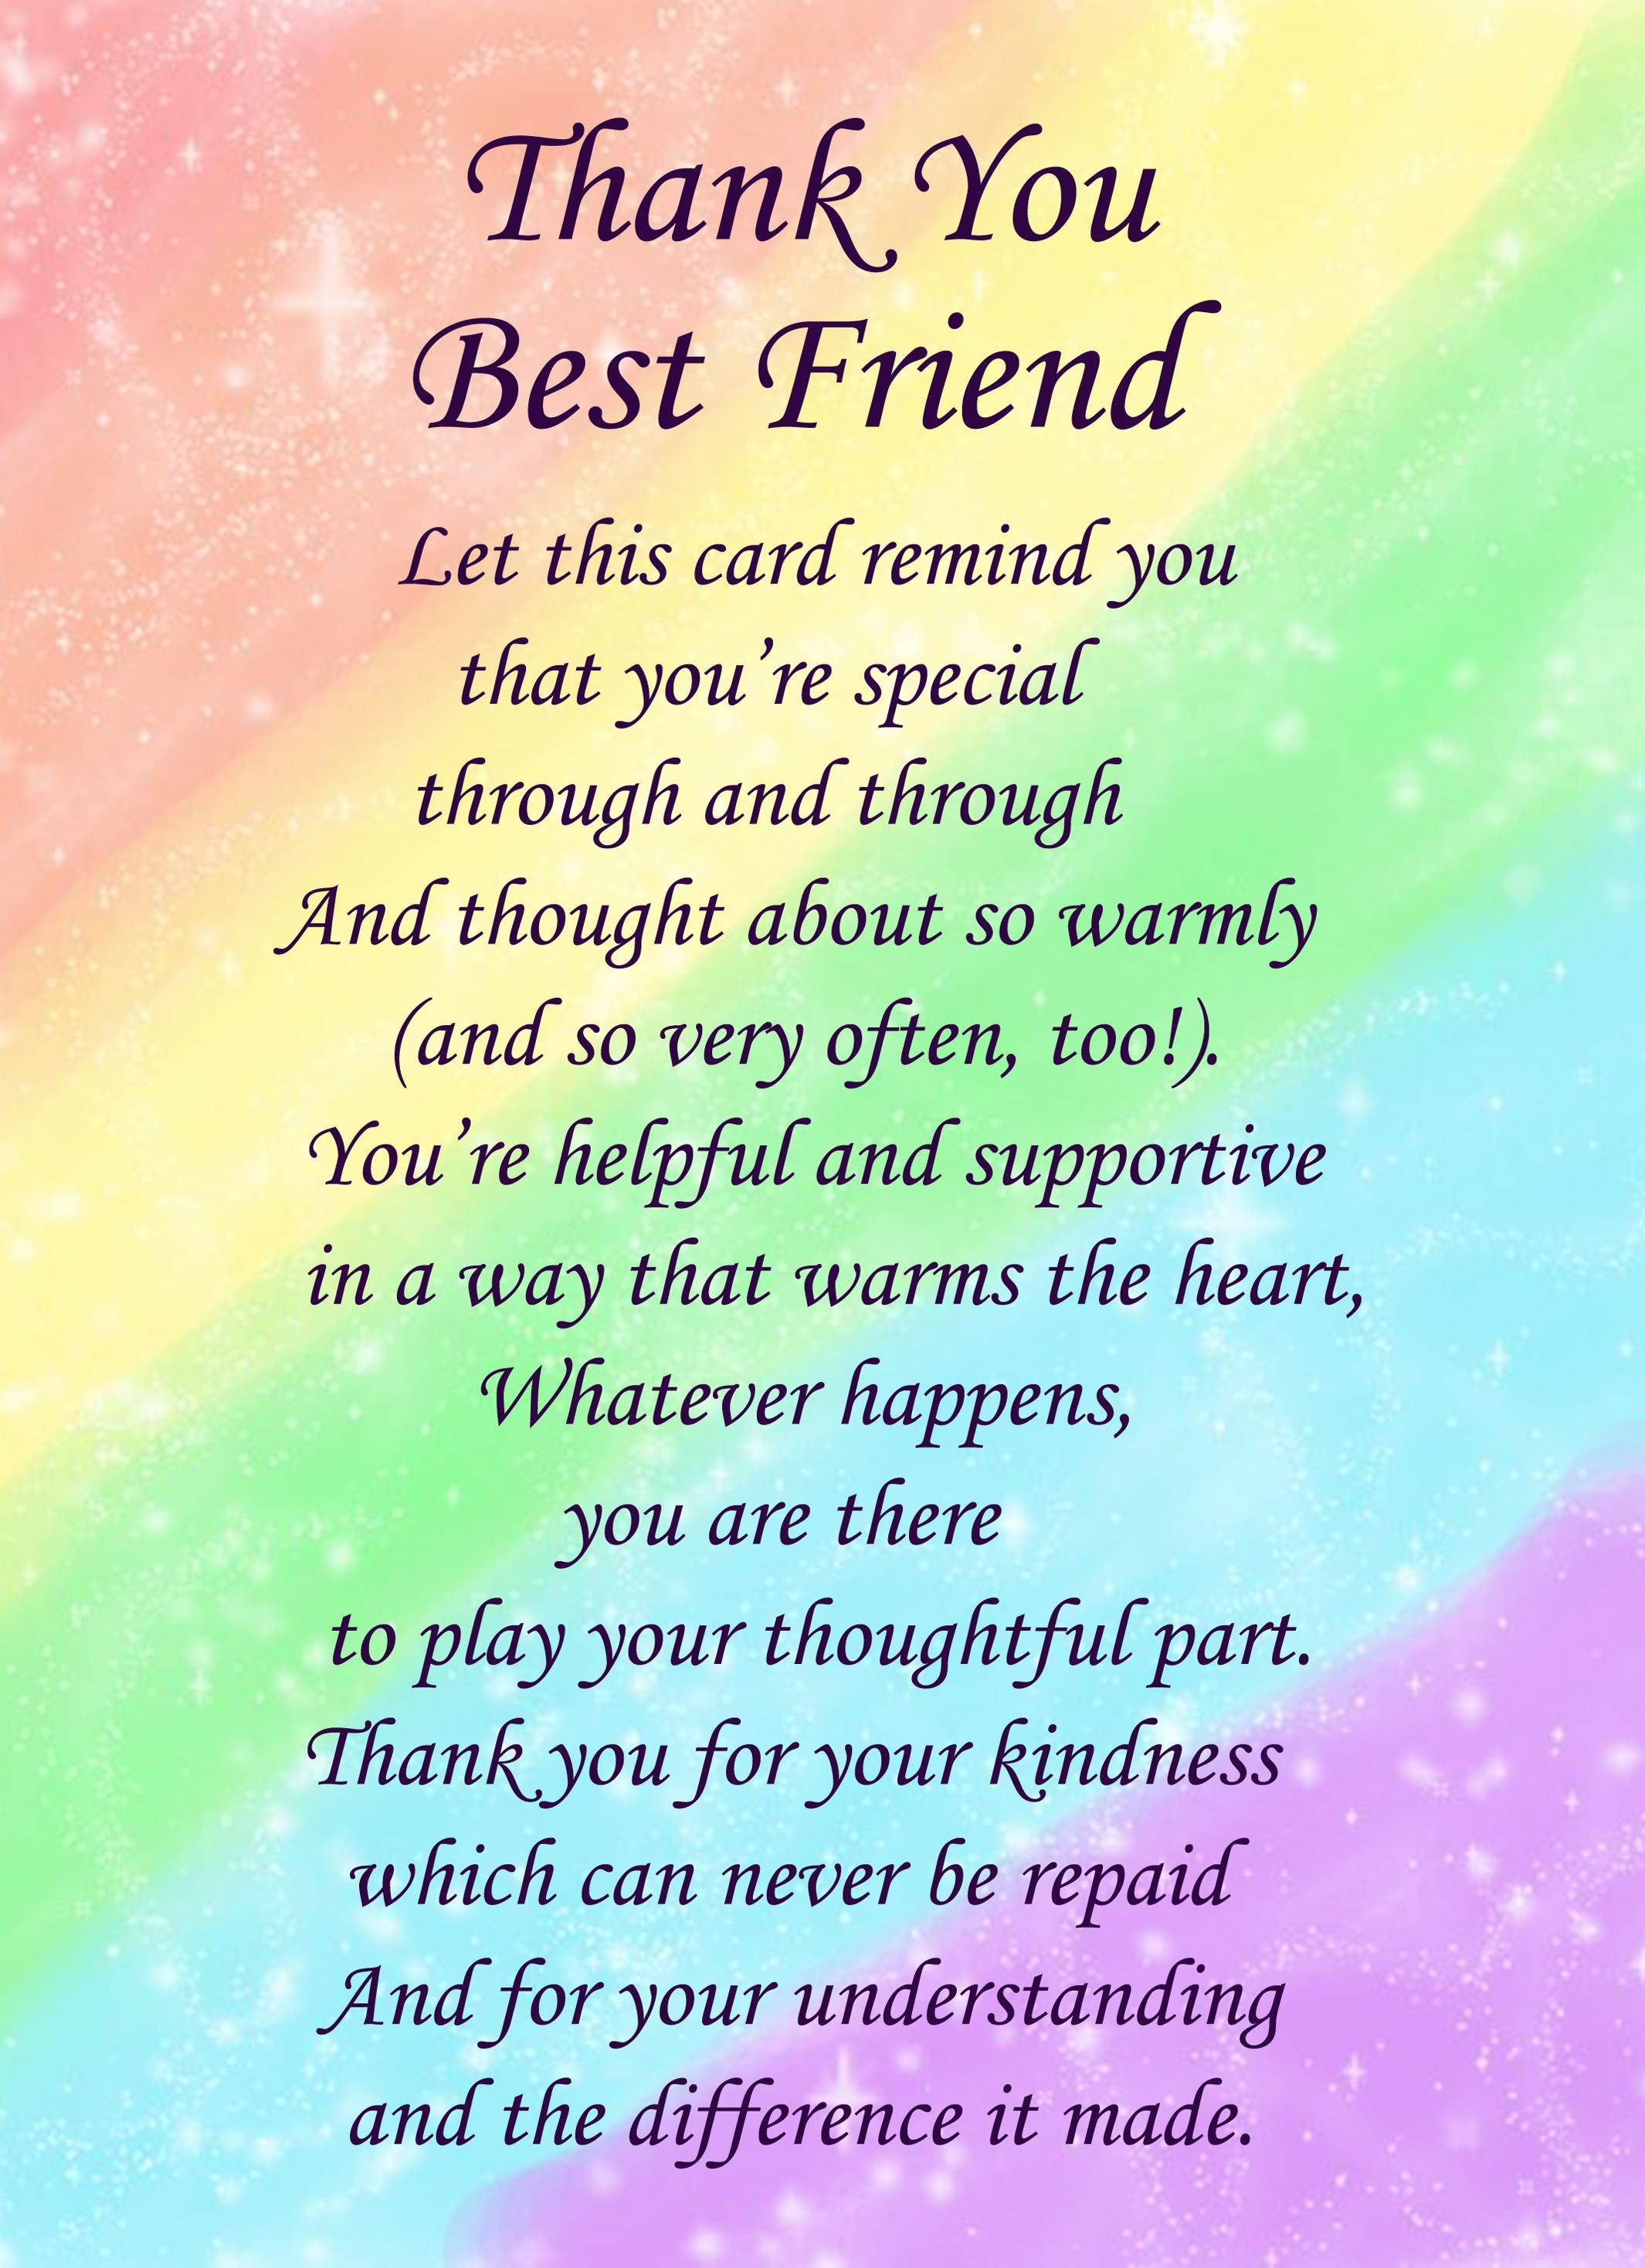 Thank You Best Friend Poem Verse Greeting Card